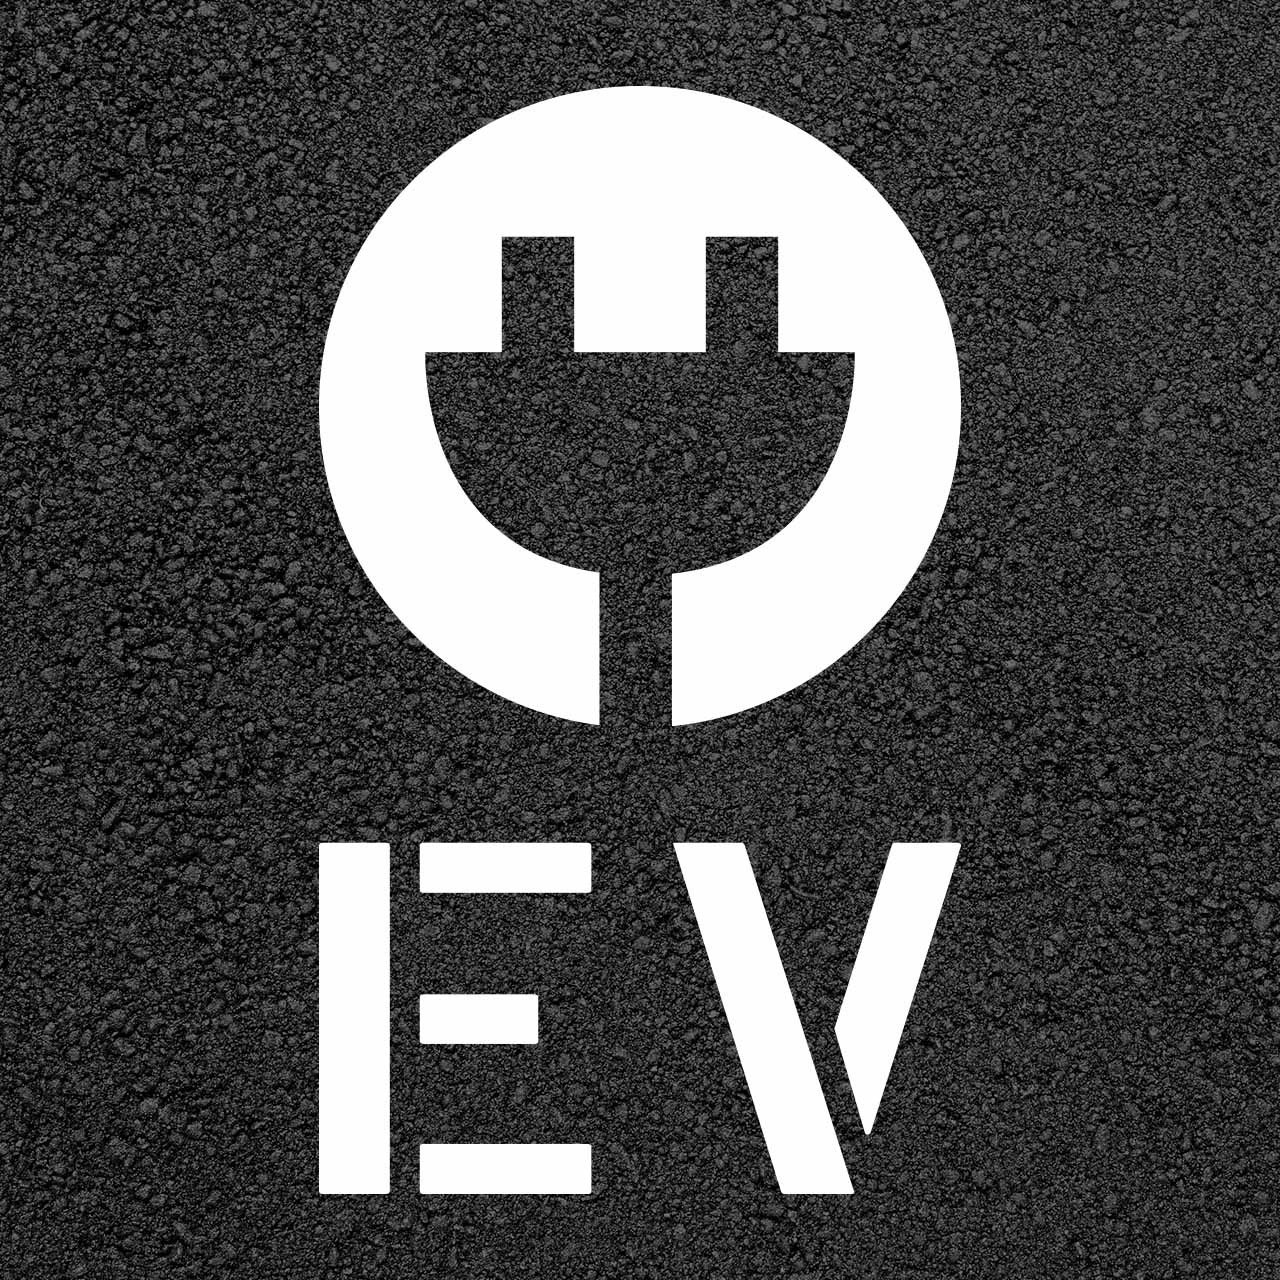 electric vehicle charging station symbol for autocad